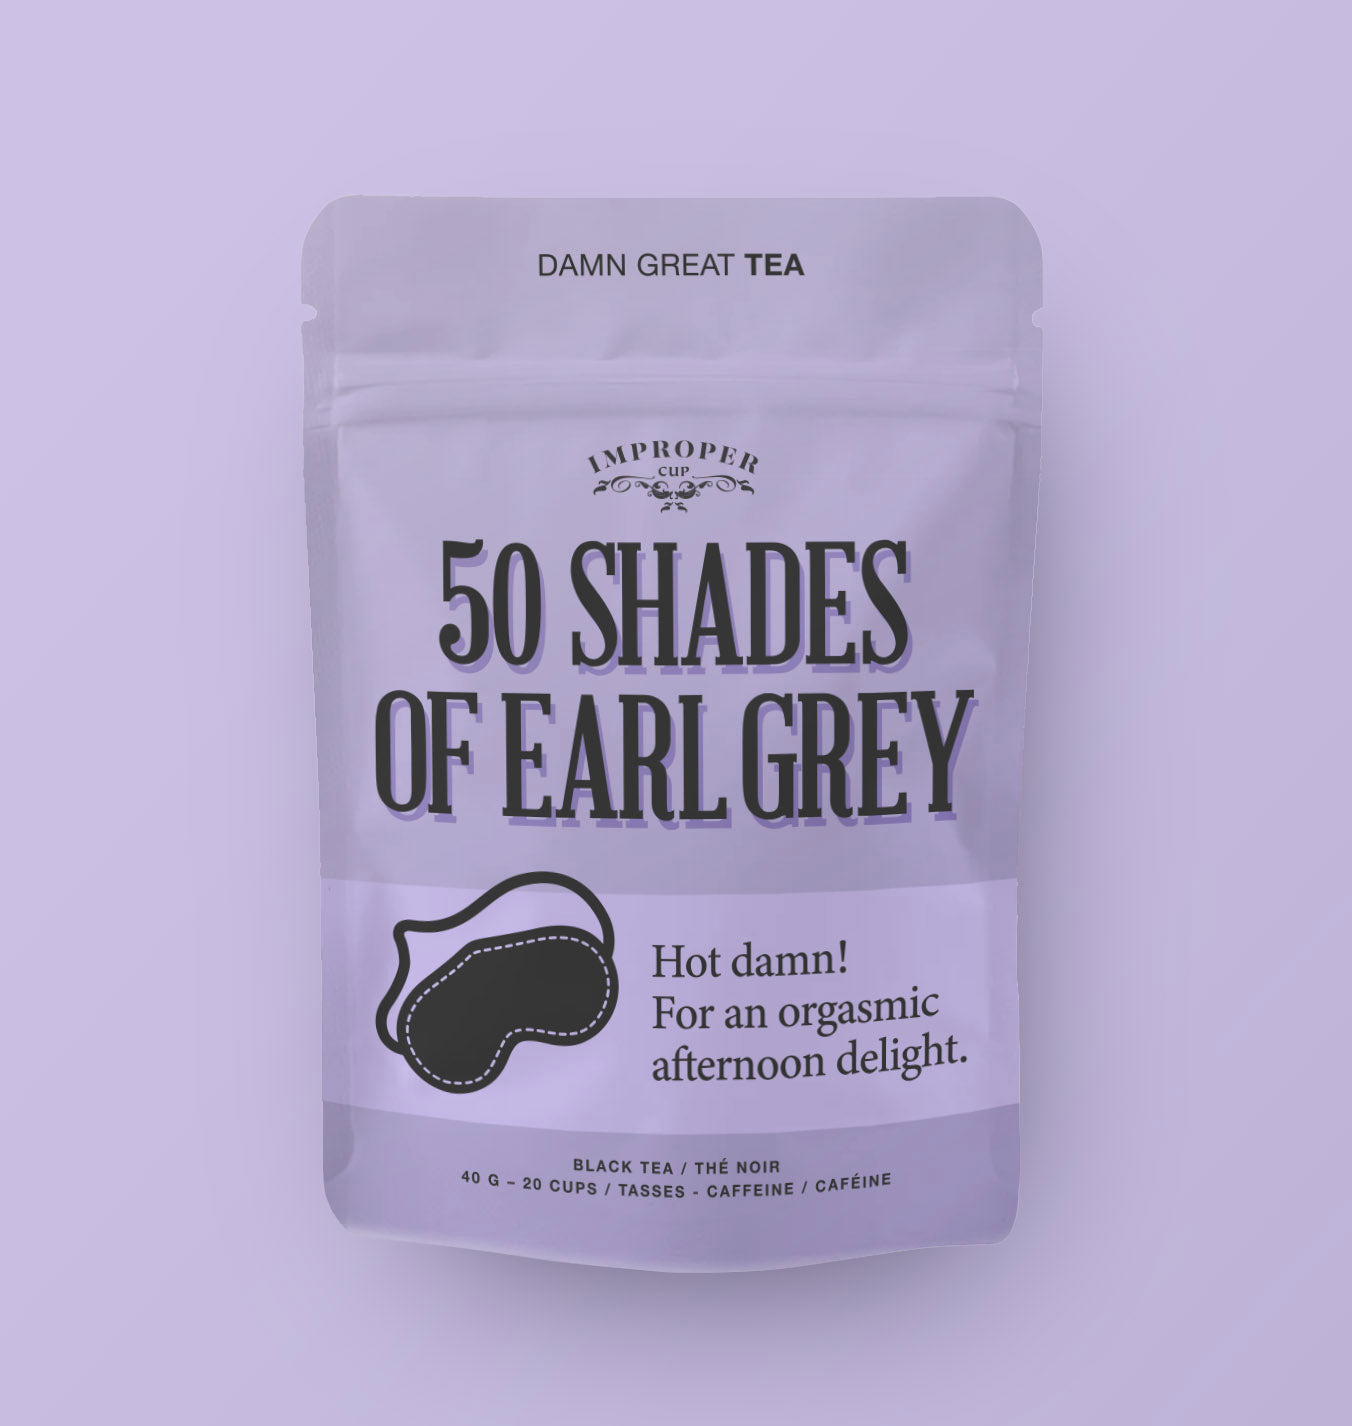 Anyone have recommendations for good Earl Grey in the US? I love